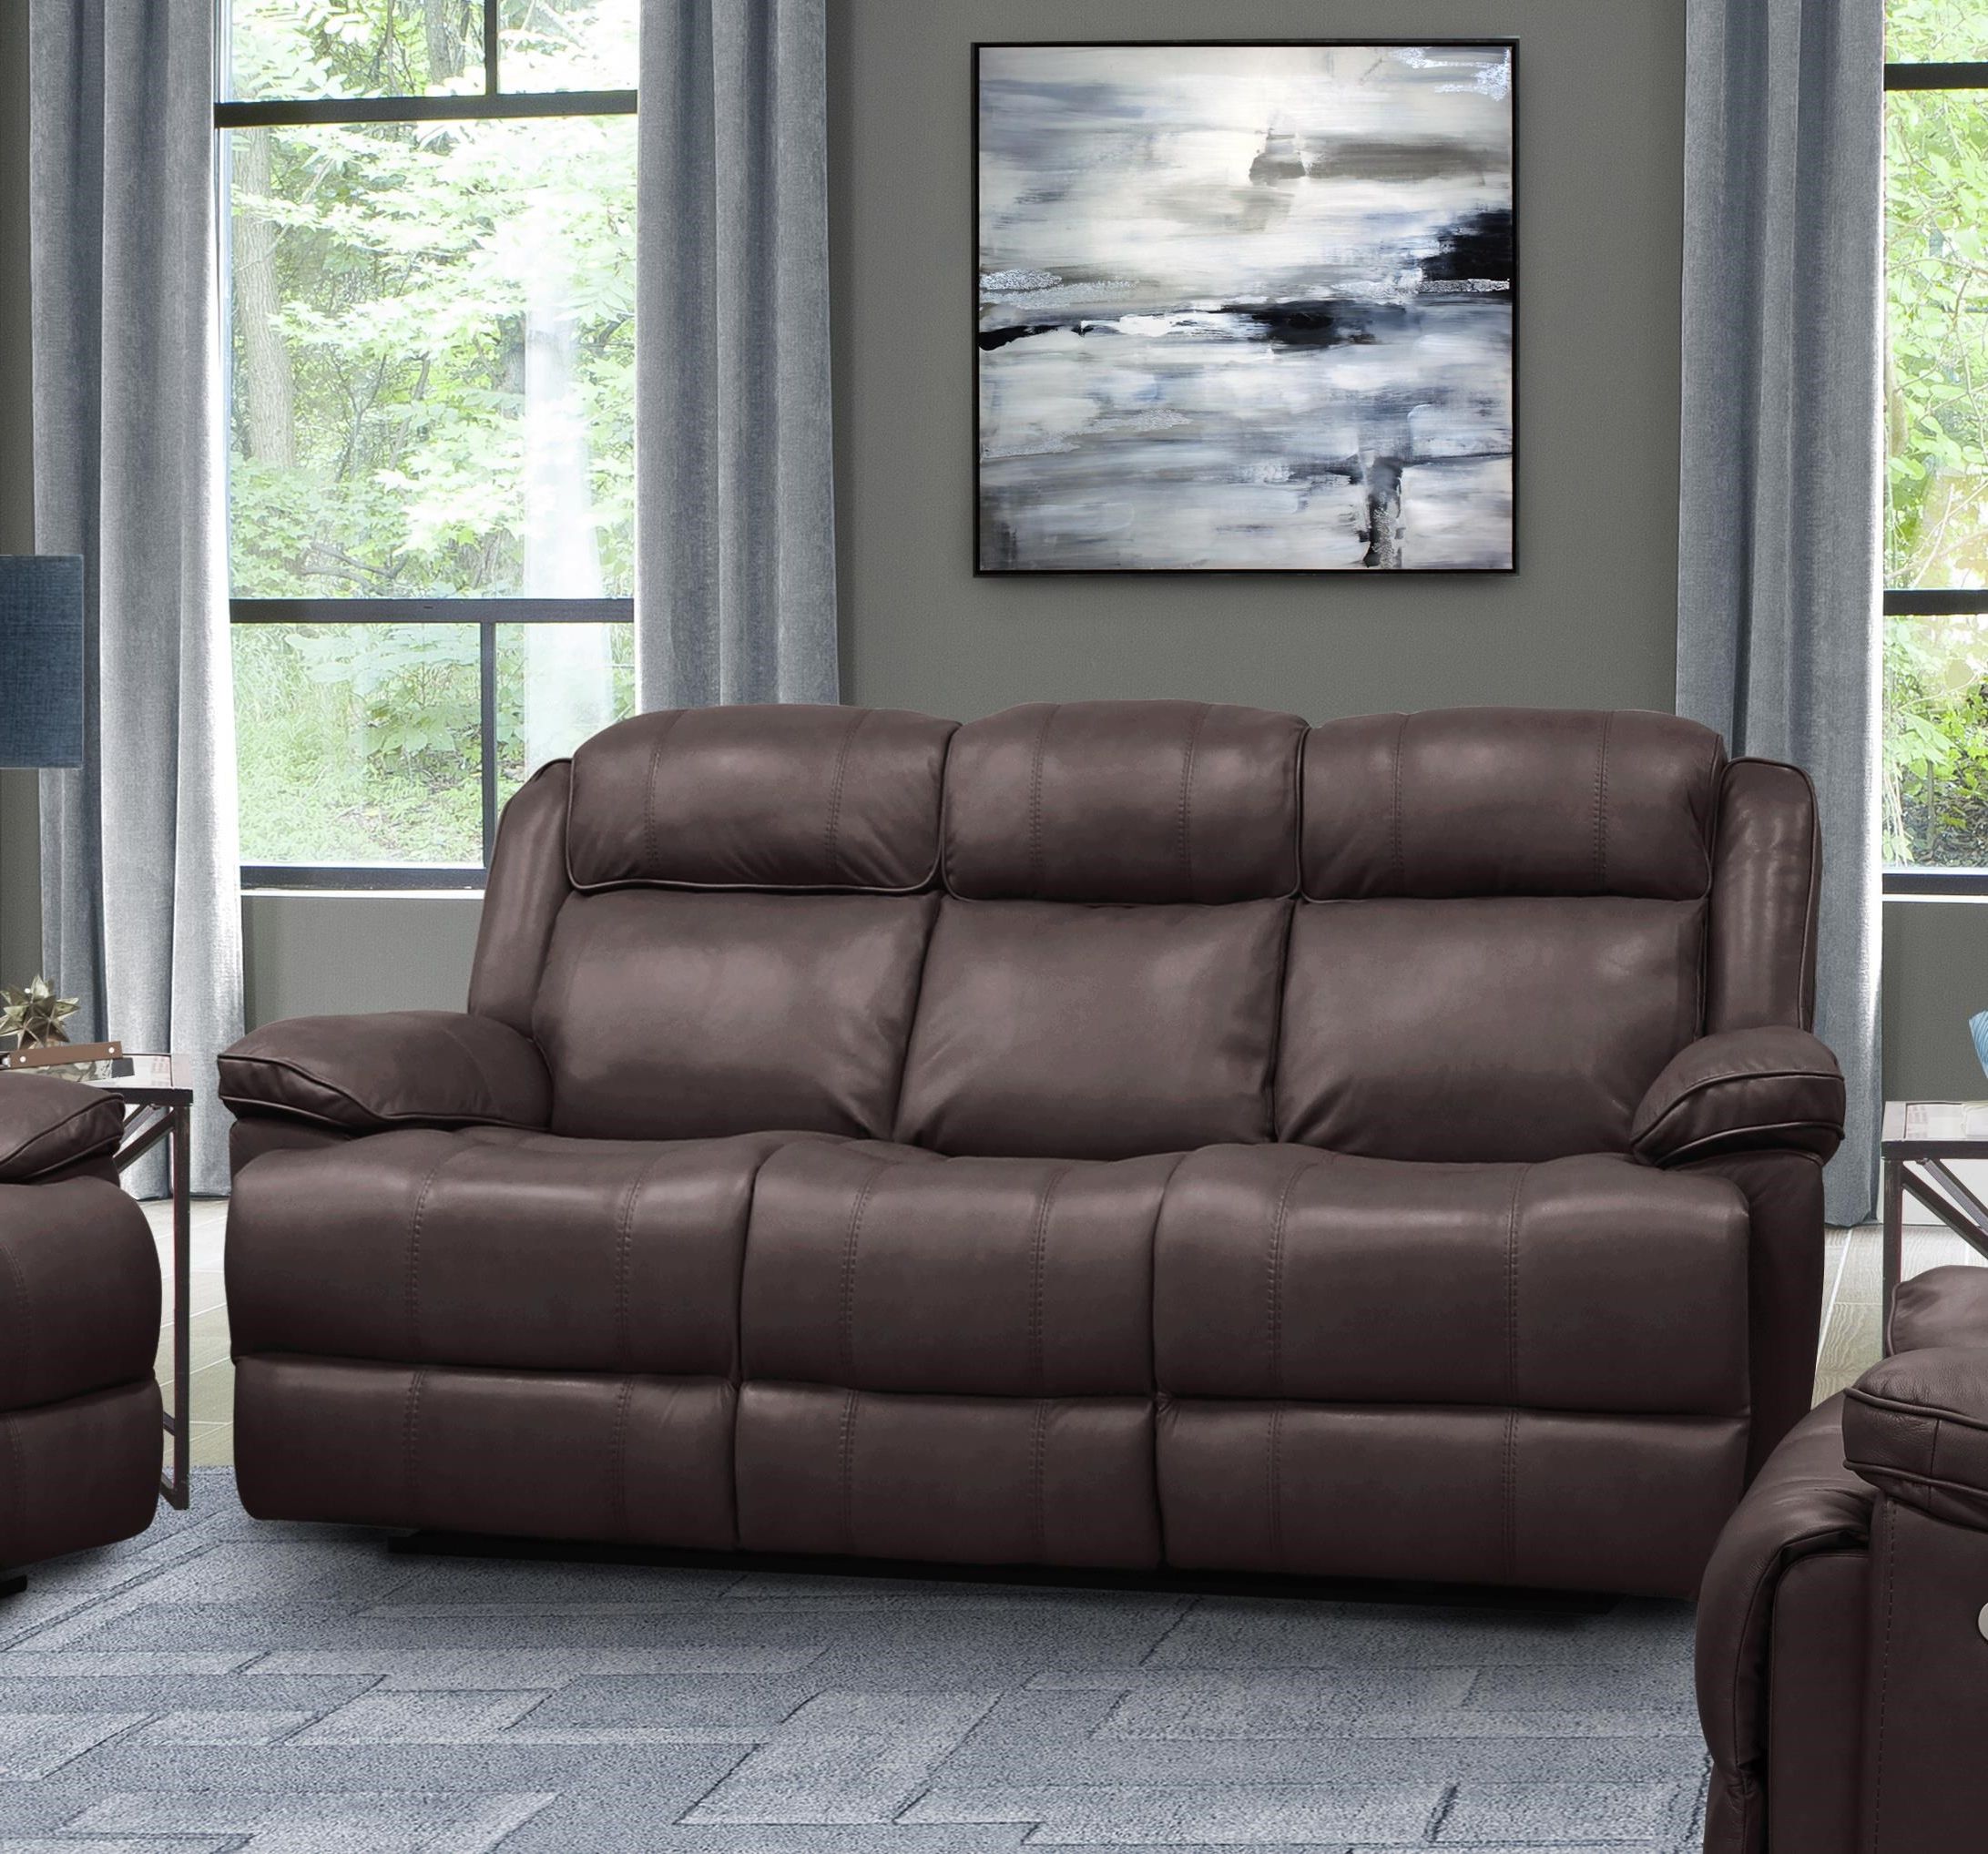 [%Parker House Elias Top Grain Leather Match Power Sofa With Inside Most Recently Released Matilda 100% Top Grain Leather Chaise Sectional Sofas|Matilda 100% Top Grain Leather Chaise Sectional Sofas Intended For 2017 Parker House Elias Top Grain Leather Match Power Sofa With|Popular Matilda 100% Top Grain Leather Chaise Sectional Sofas Inside Parker House Elias Top Grain Leather Match Power Sofa With|Best And Newest Parker House Elias Top Grain Leather Match Power Sofa With With Matilda 100% Top Grain Leather Chaise Sectional Sofas%] (View 22 of 25)